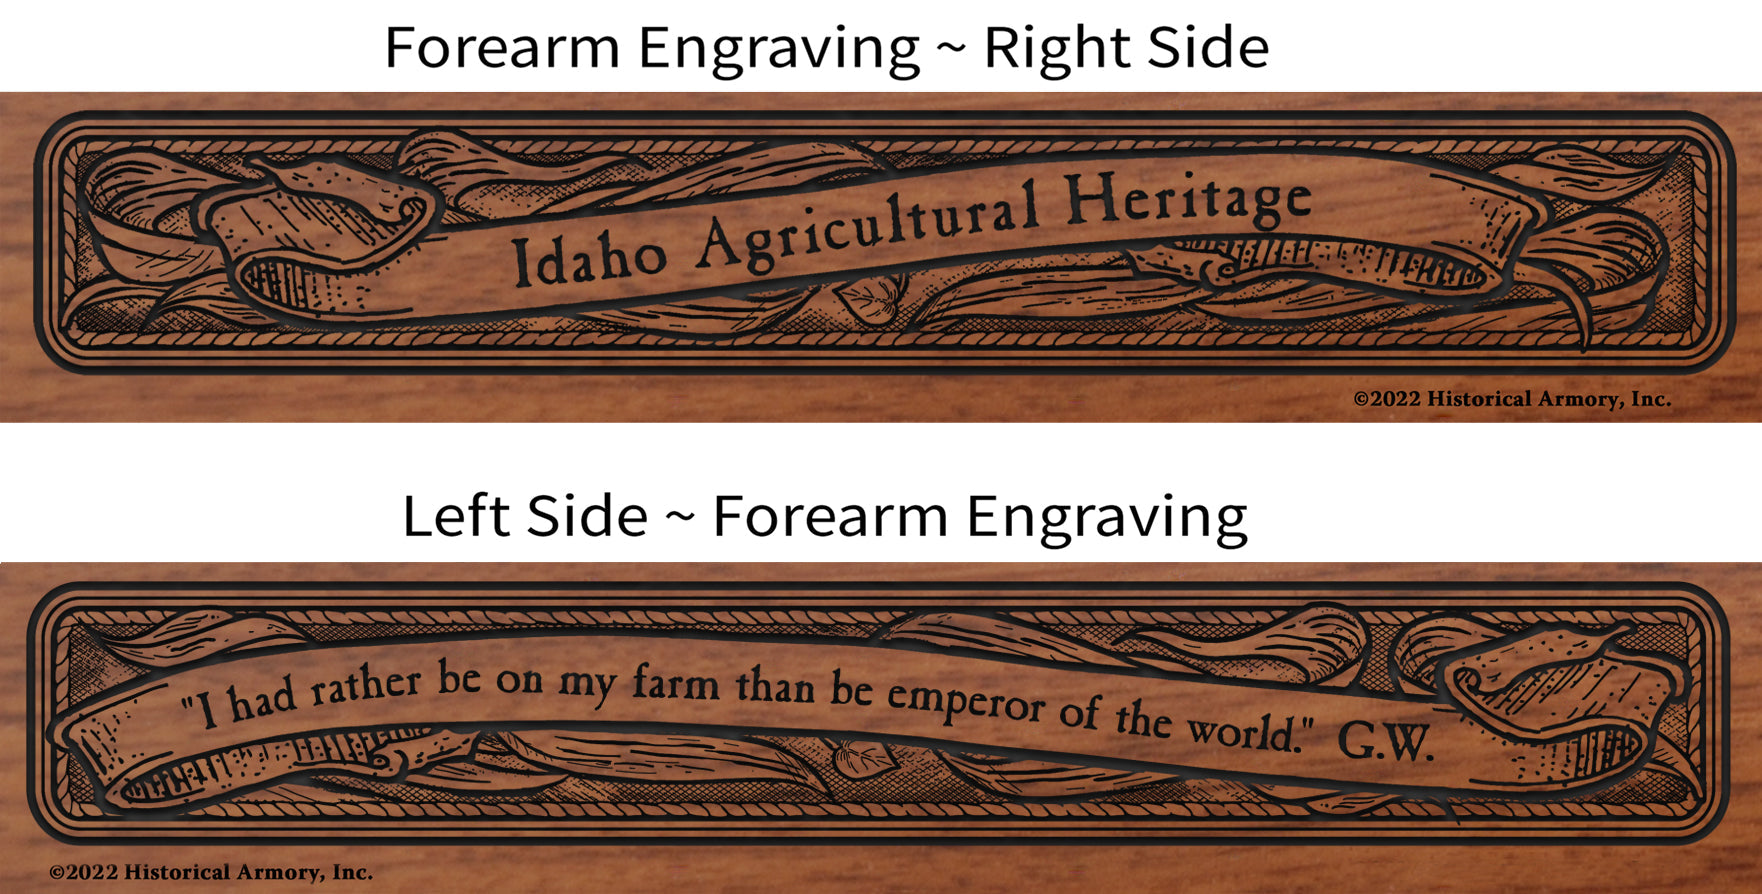 Idaho Agricultural Heritage Engraved Rifle Forearm